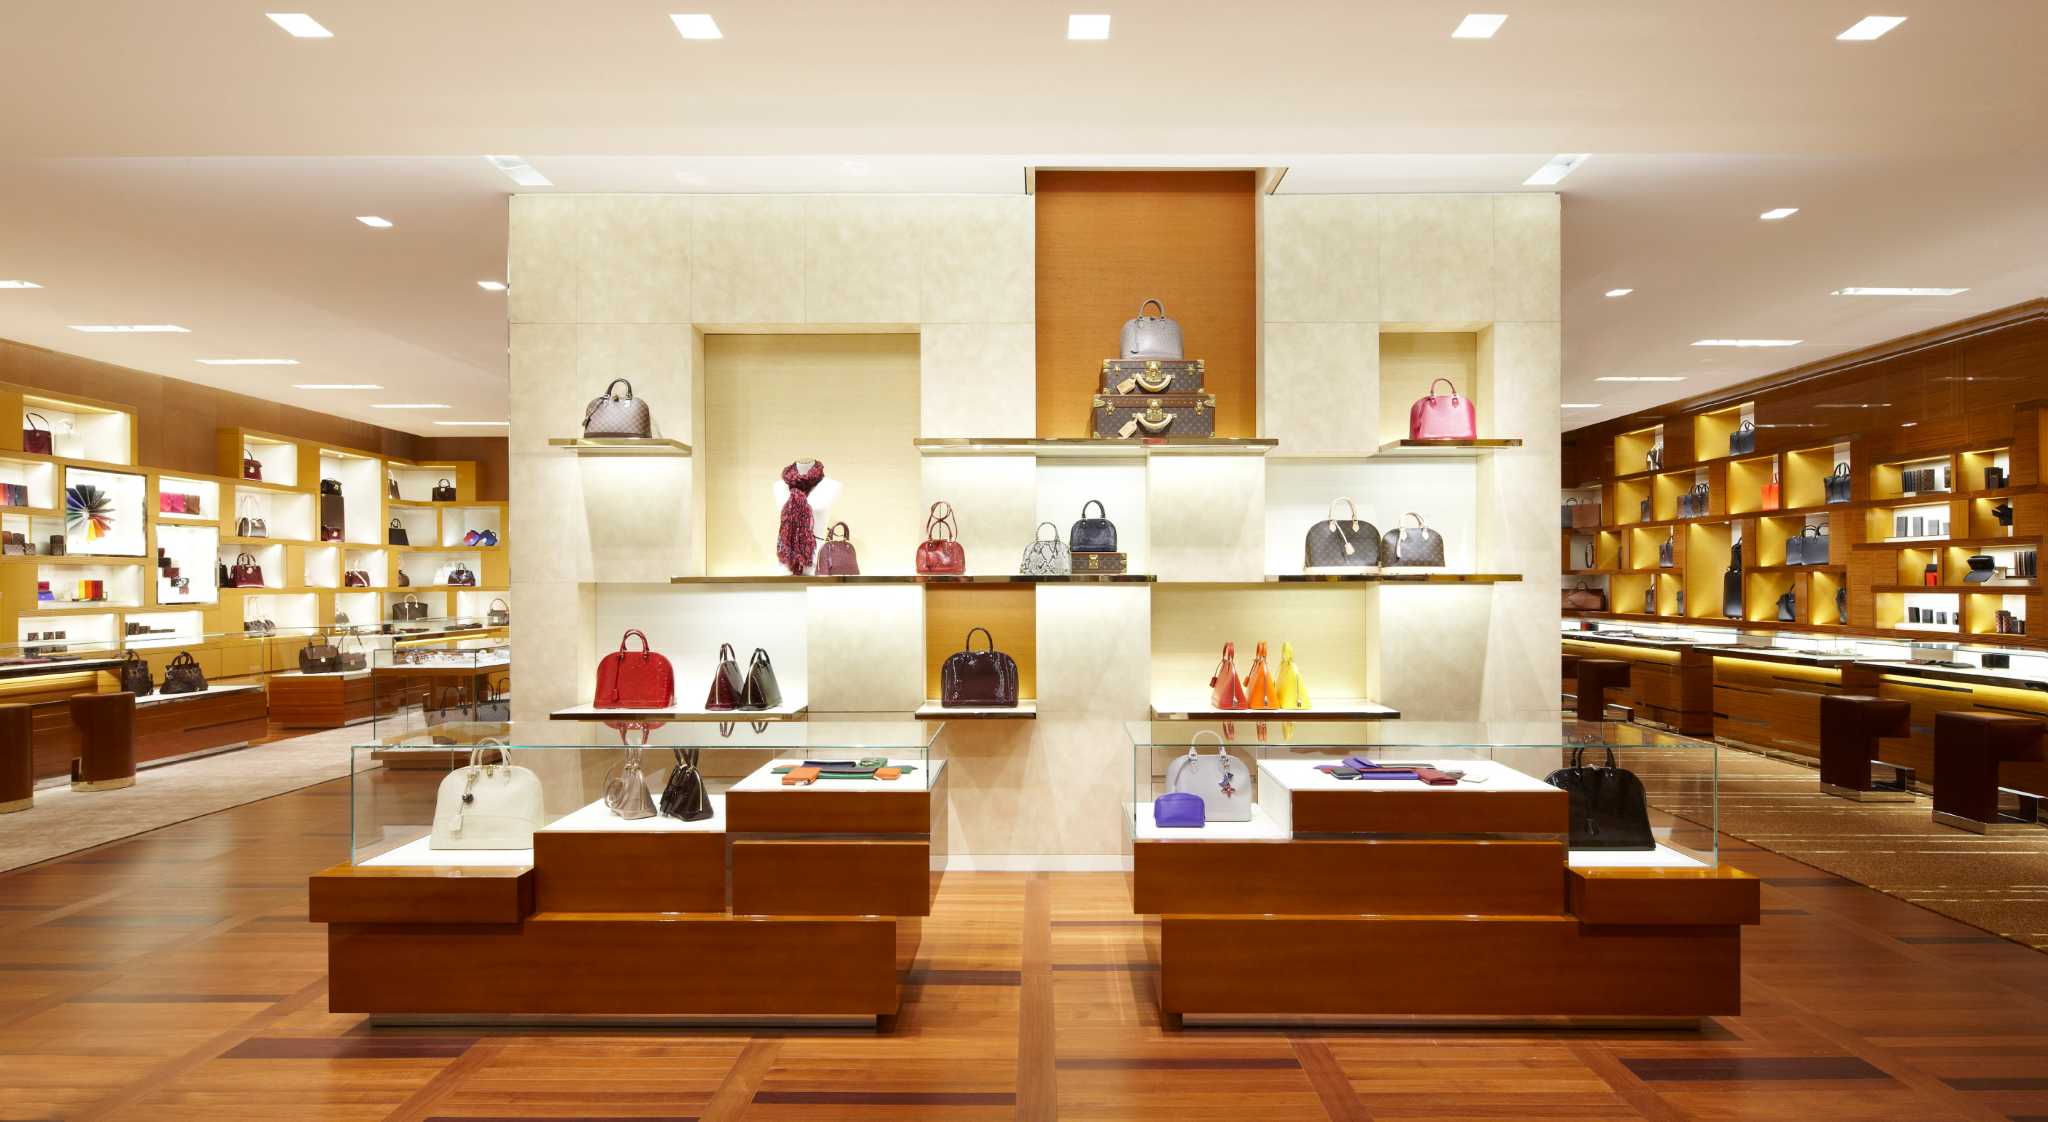 Louis Vuitton expands in the Galleria